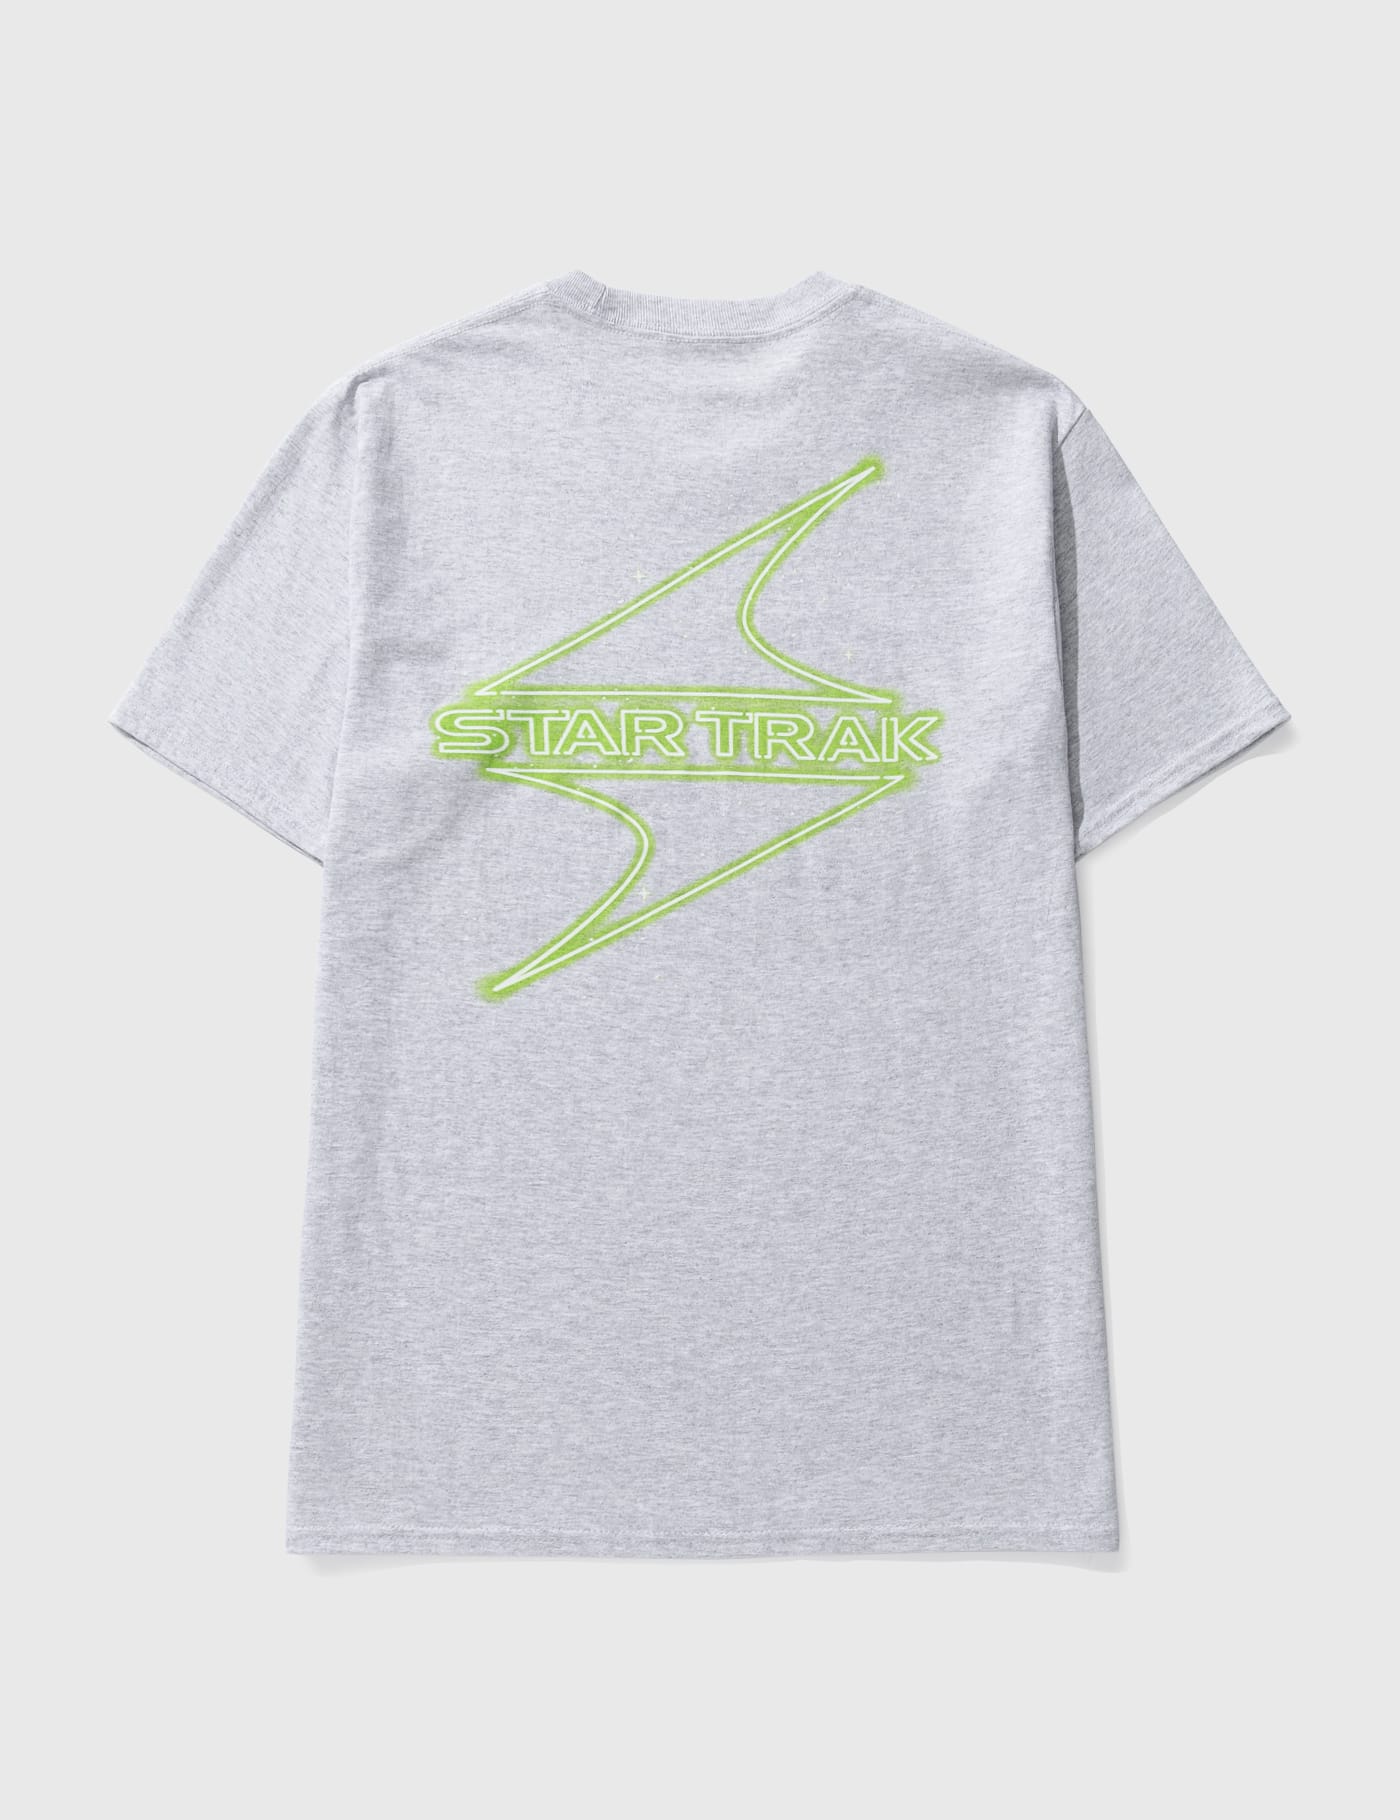 STAR TRAK - Neon Logo T-shirt | HBX - Globally Curated Fashion and 